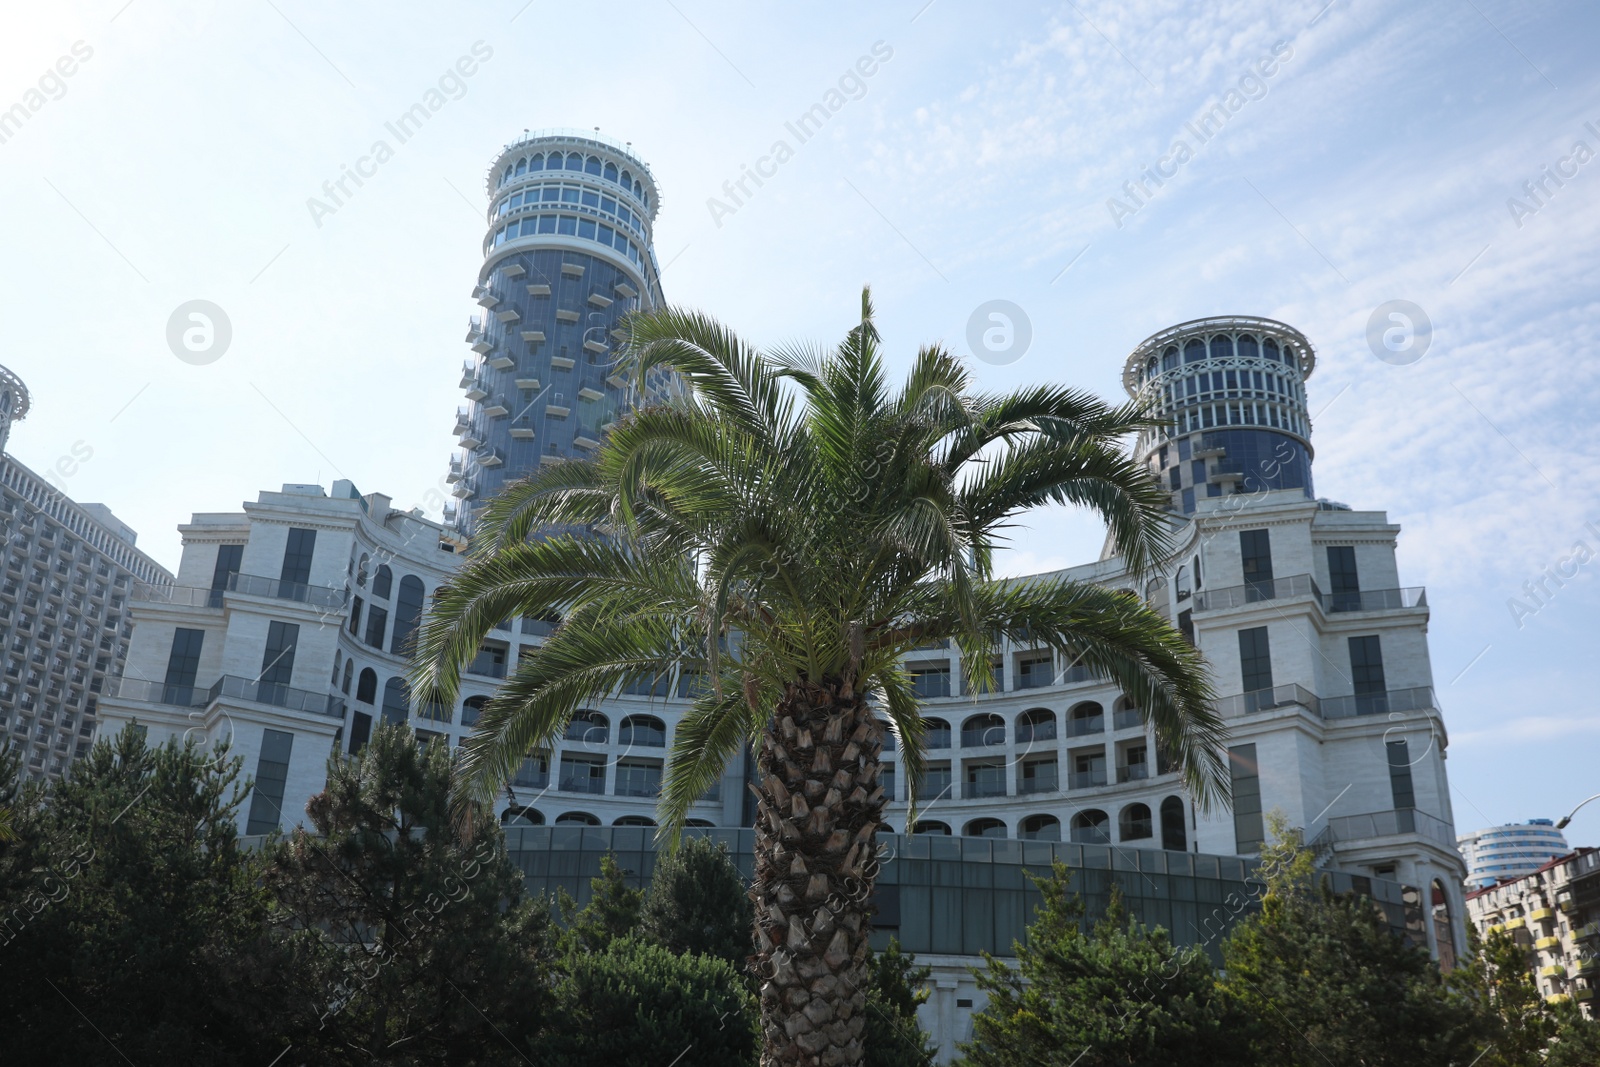 Photo of BATUMI, GEORGIA - JUNE 10, 2022: Beautiful view of Sea Towers Suit hotel and palm trees outdoors